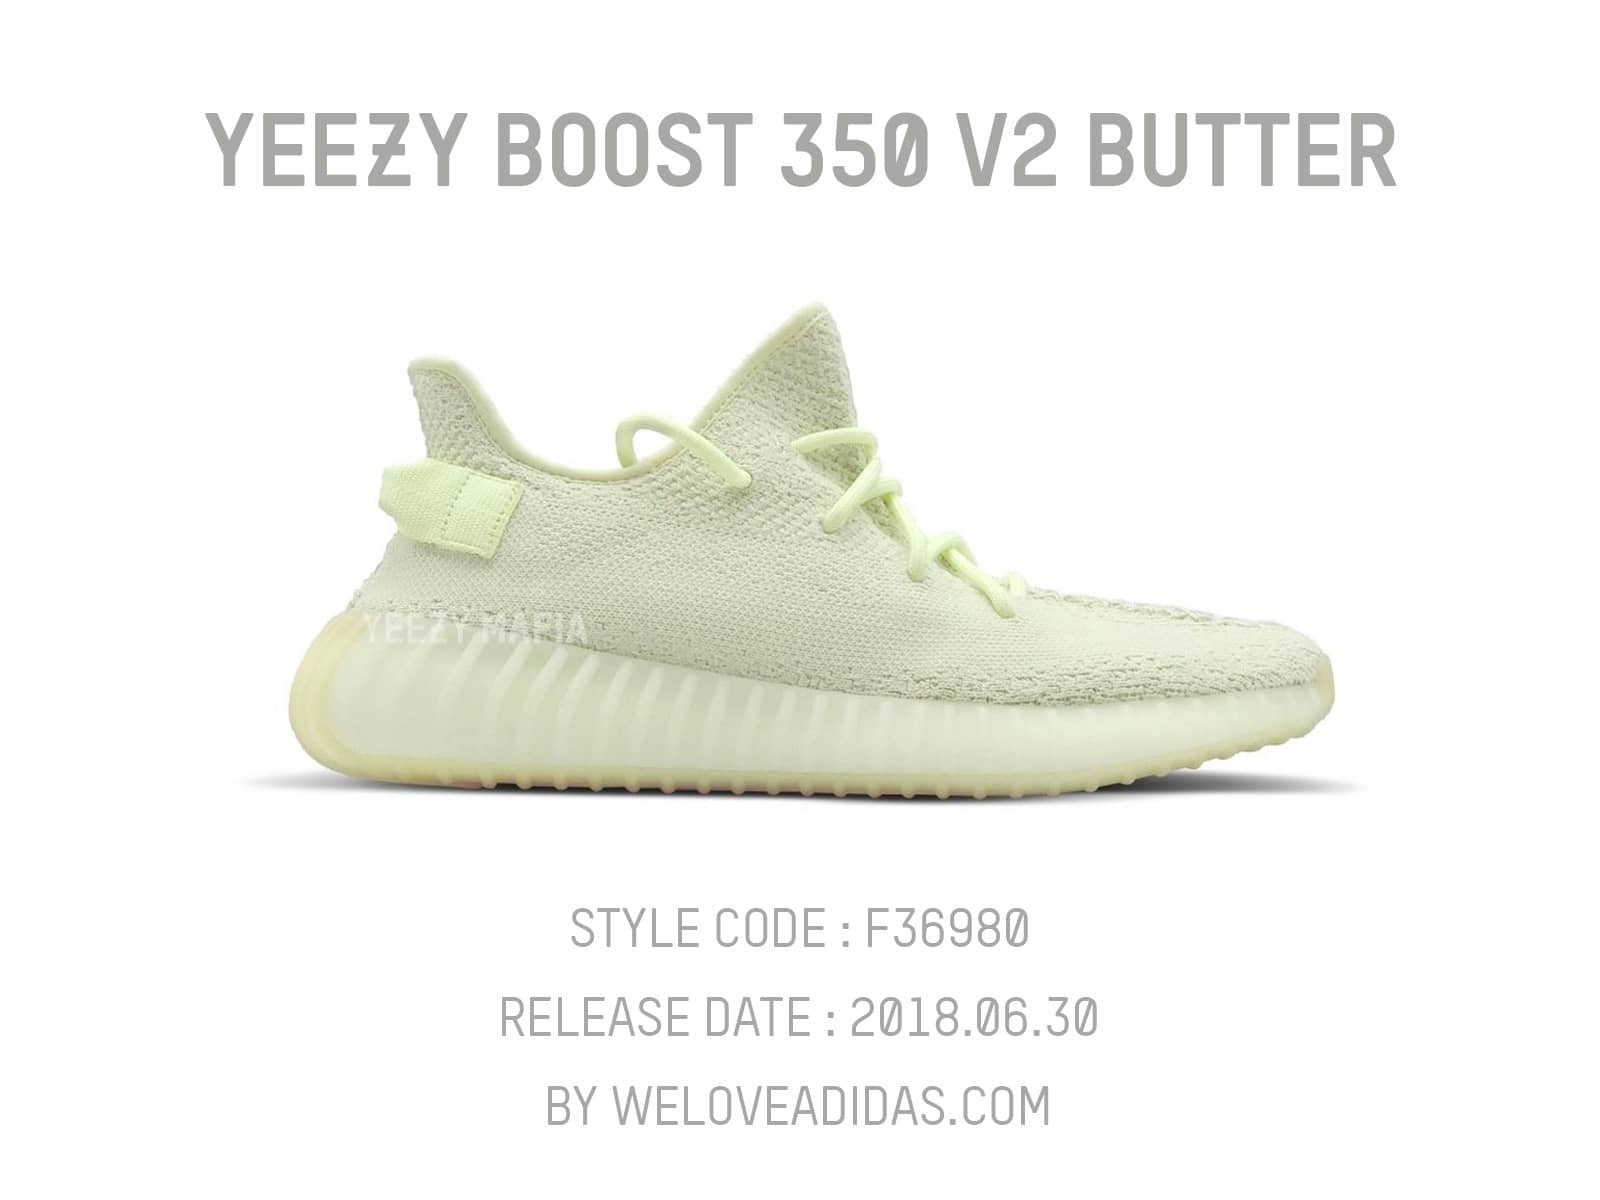 adidas Yeezy Boost 350 V2 Butter Release 30th June 2018